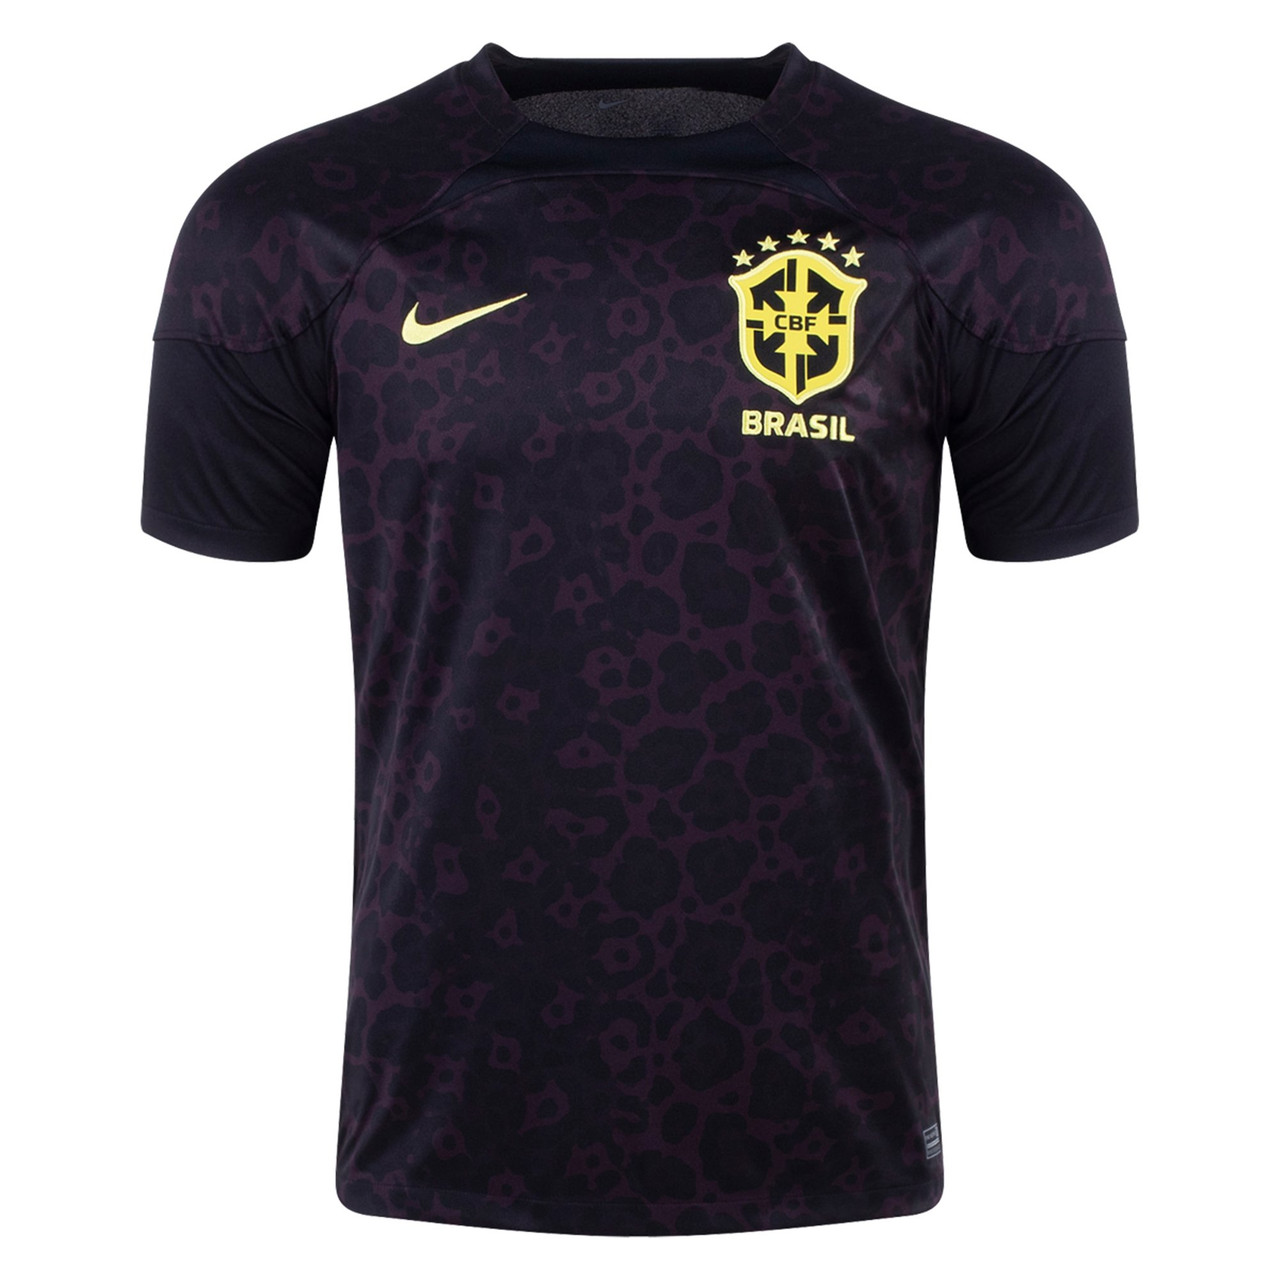 Where to buy soccer jersey